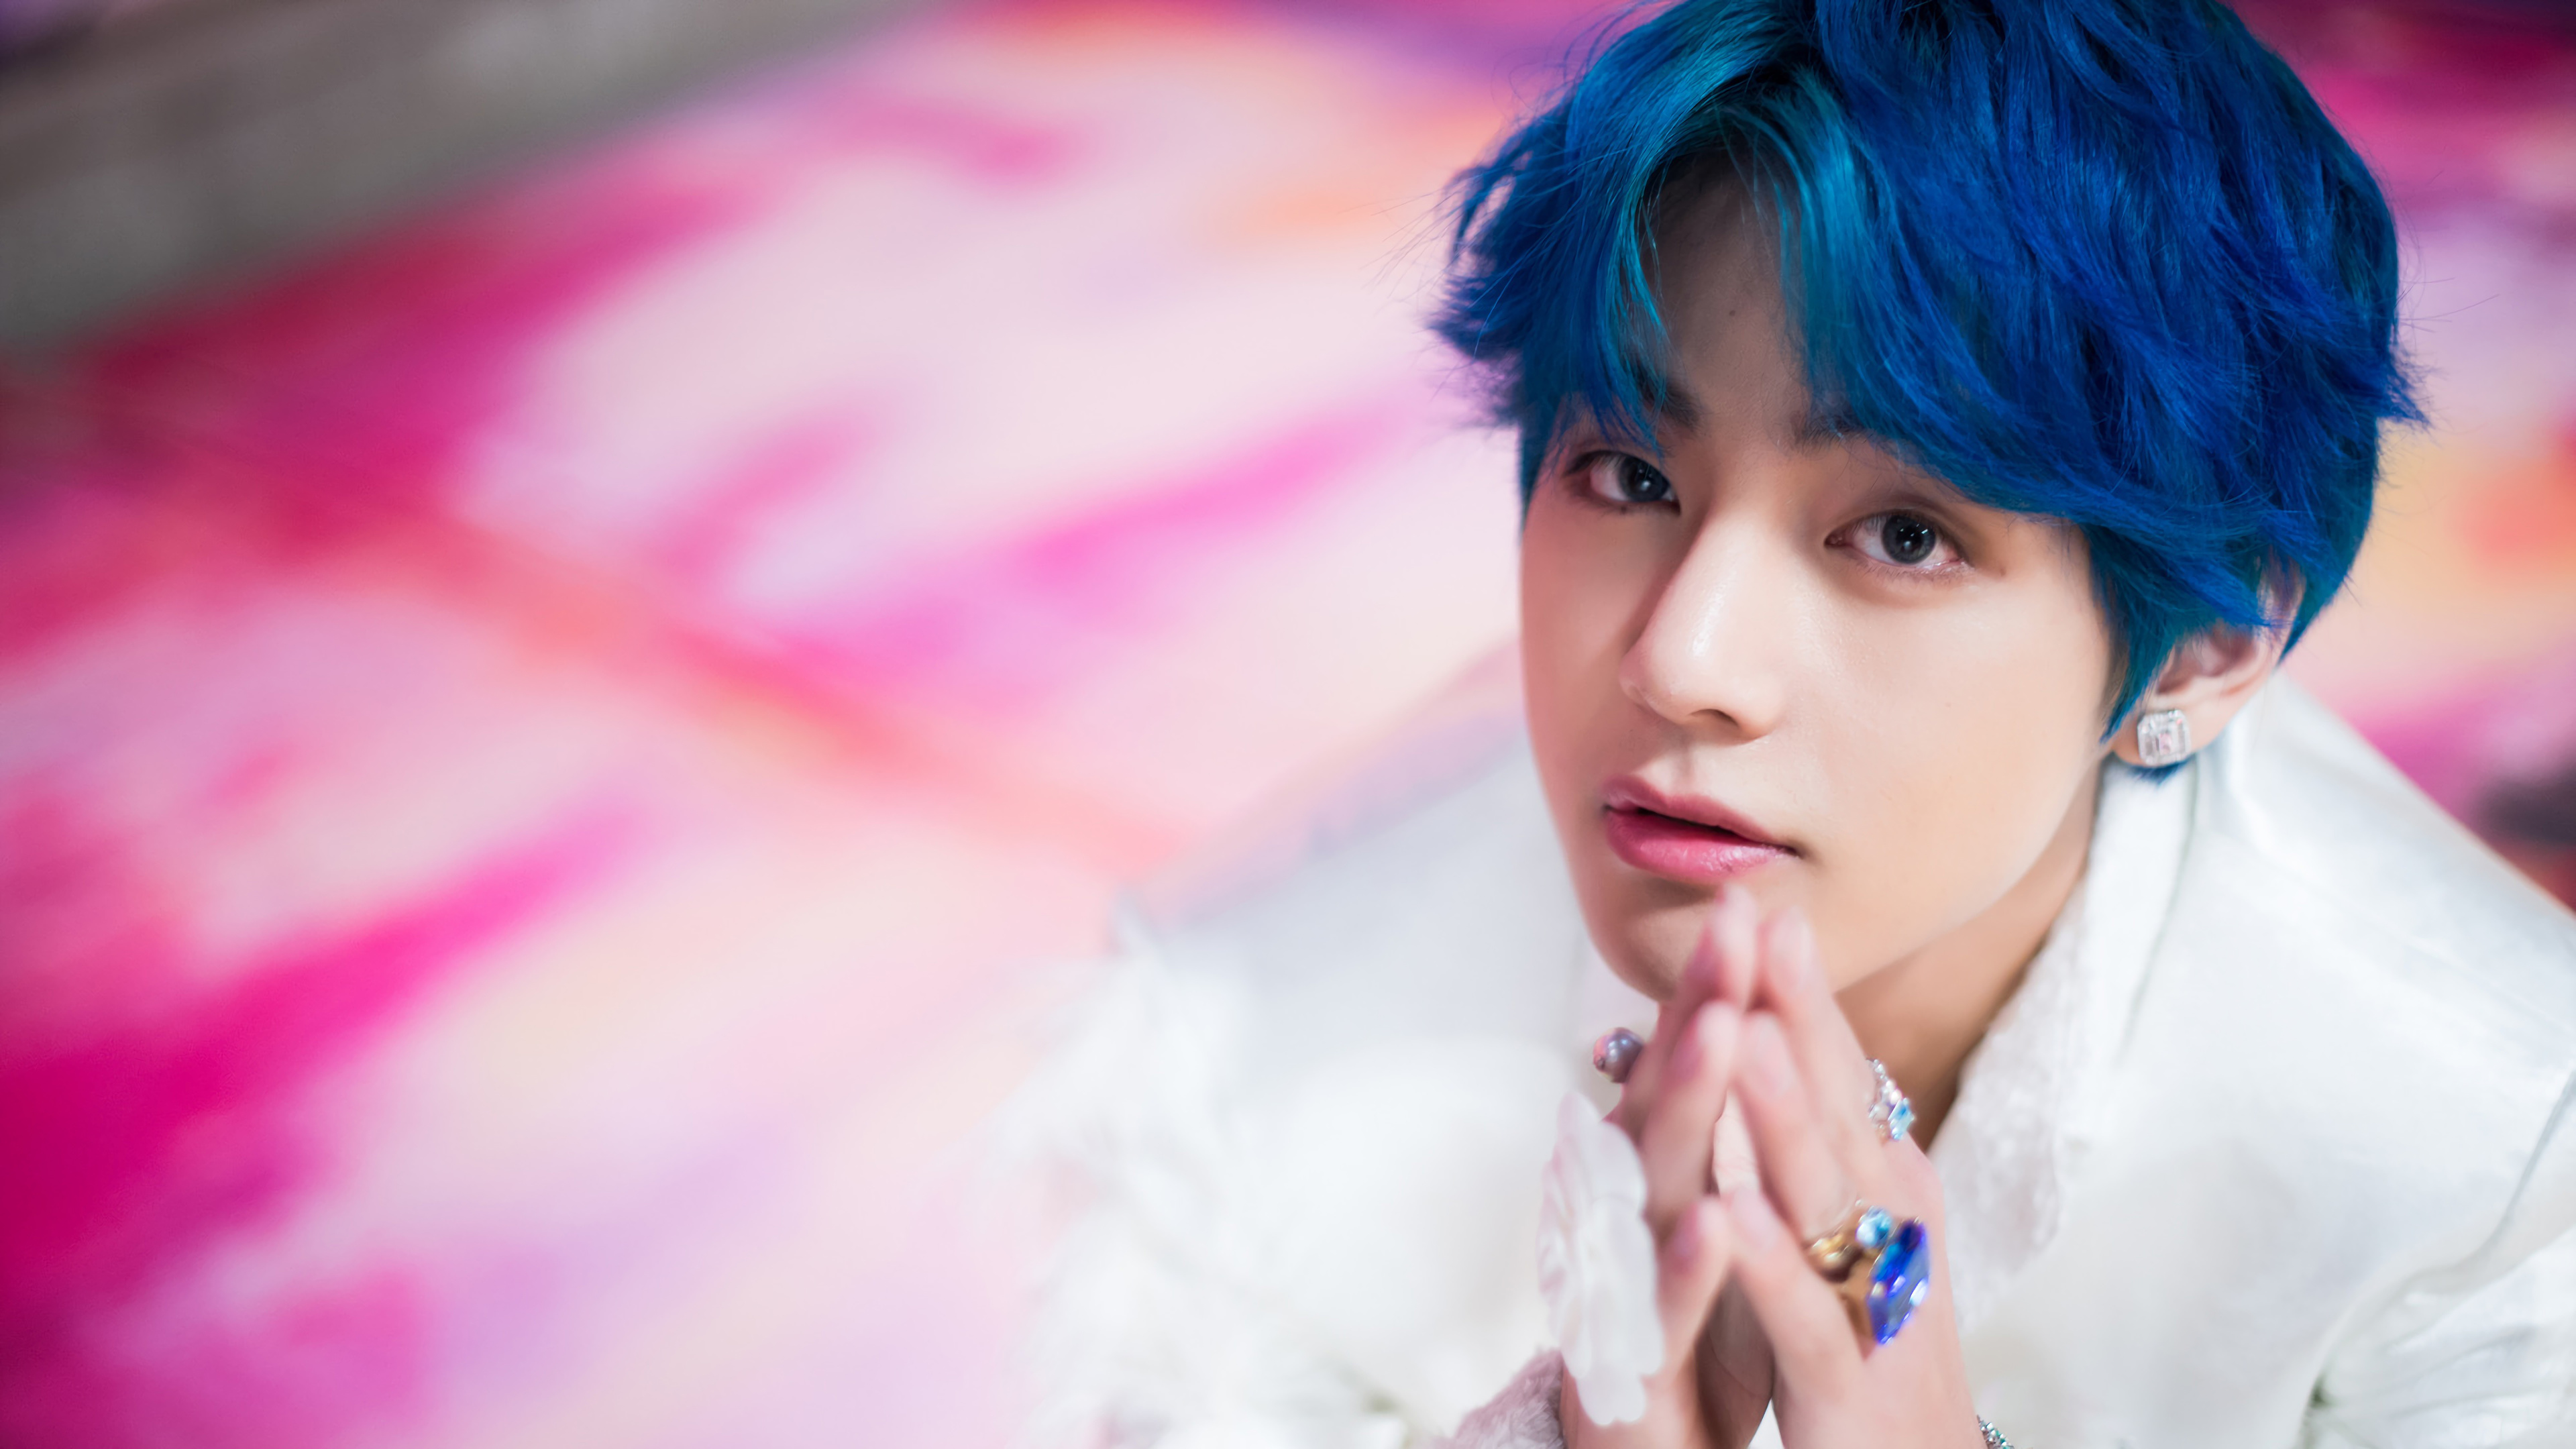 BTS' V's Blue Hair in "Boy With Luv" Concept Photos - wide 6